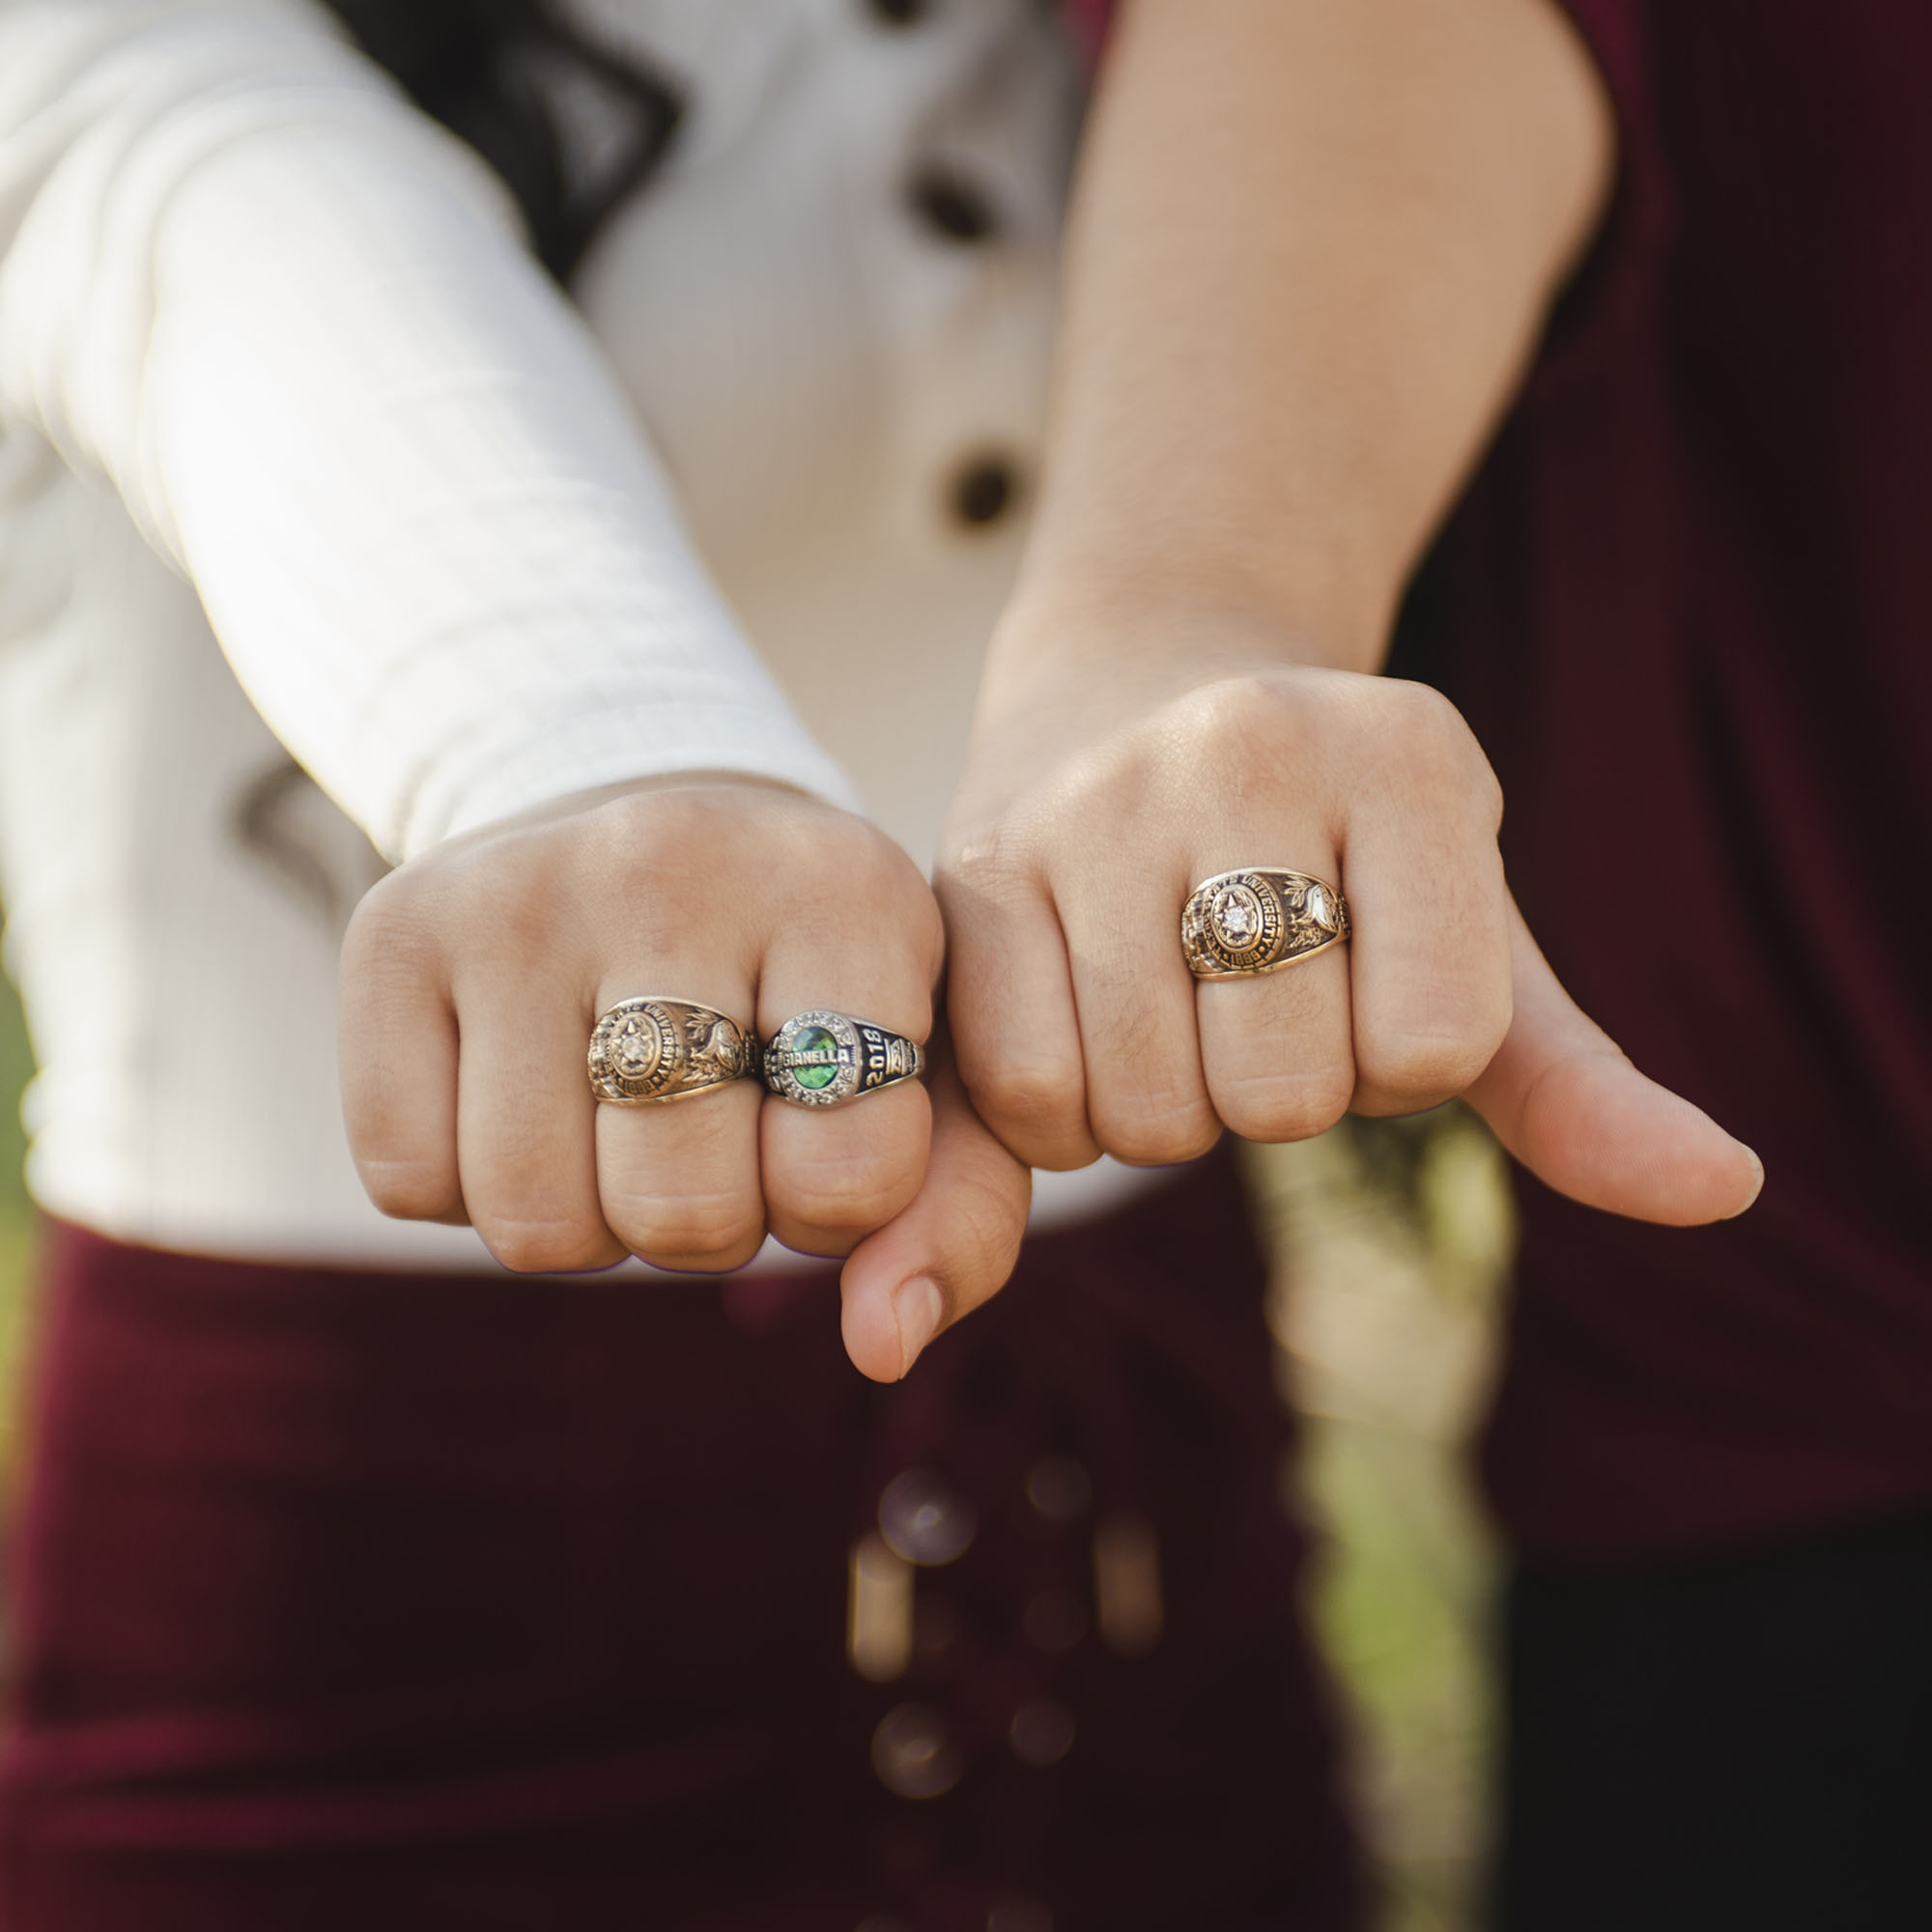 Two people's hands, showing their Texas State rings.